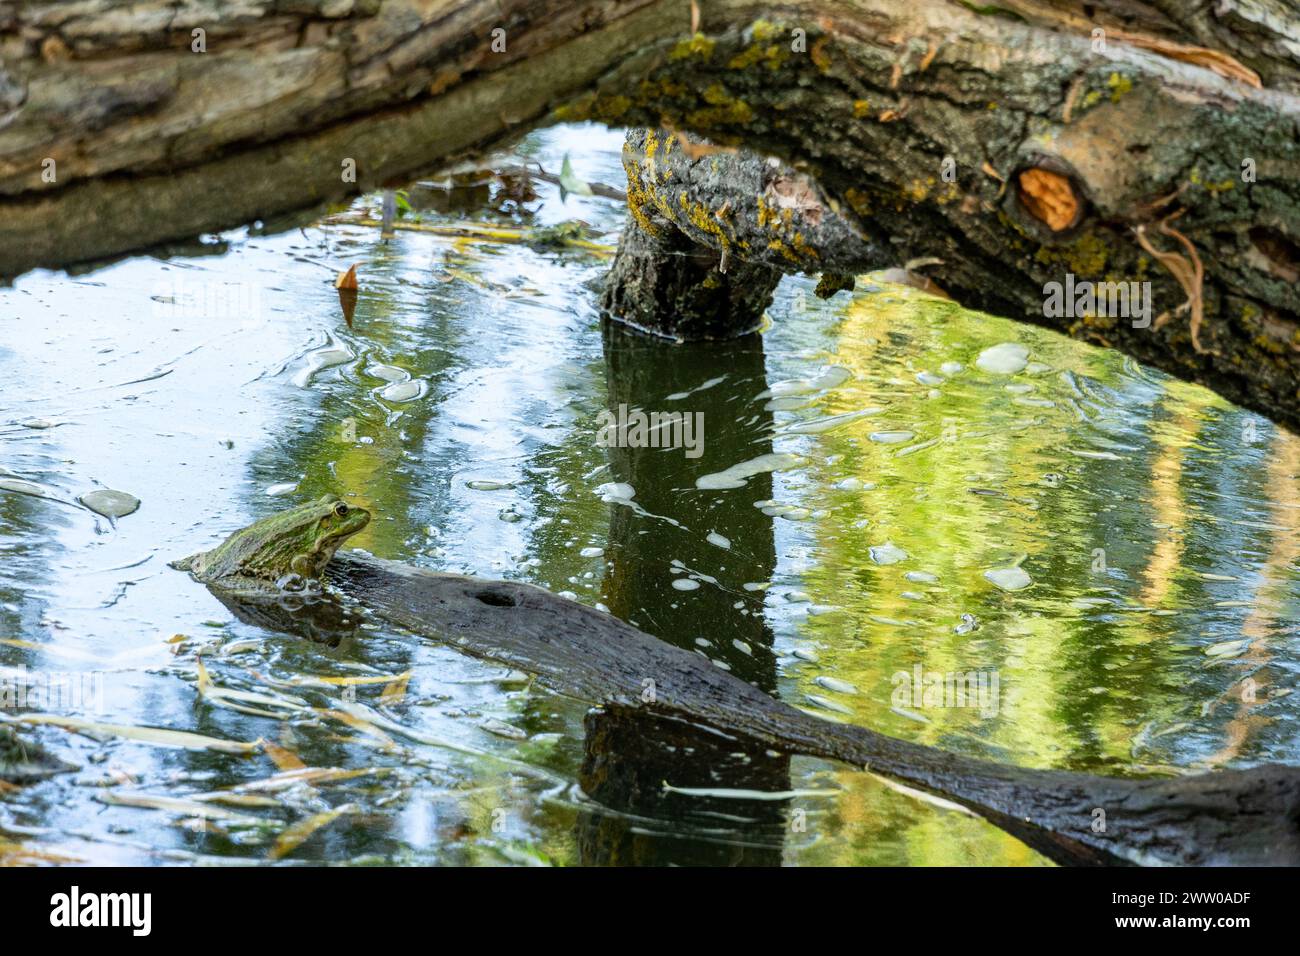 A big frog is sitting on a flooded tree. Stock Photo